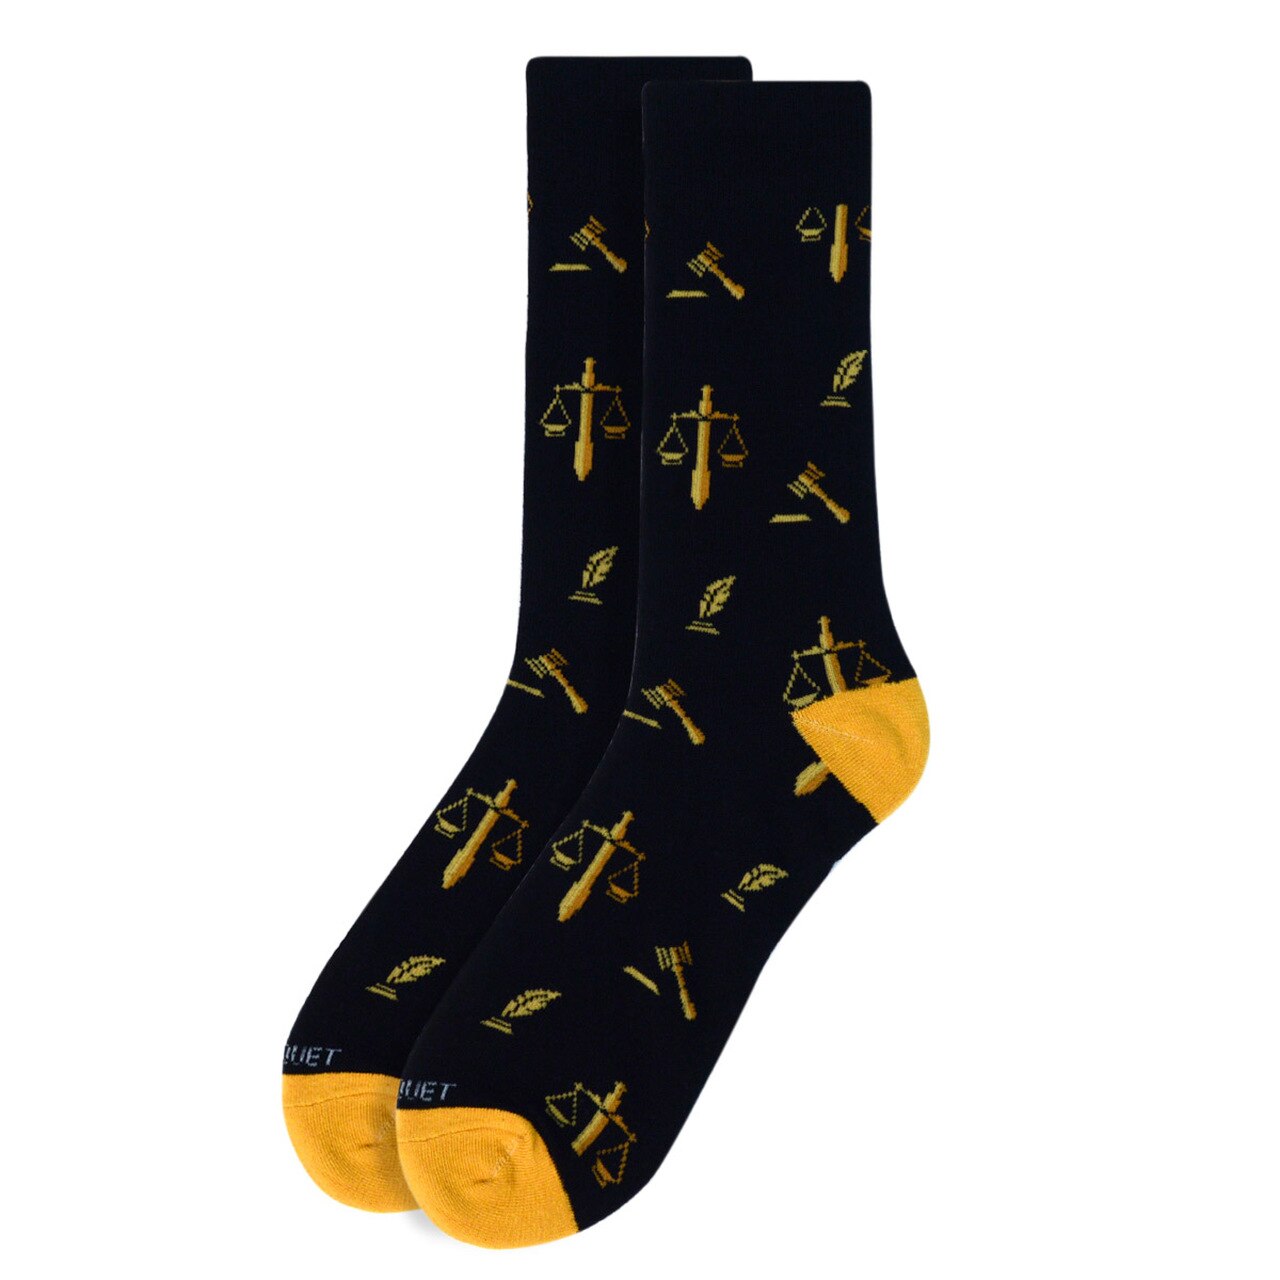 MashasCorner.com   Men's Law & Order Justice Themed Premium Collection Novelty Socks  Who said that socks have to be boring? Colorful, novelty or funny socks is the way to go. That’s why we have a wide range of different colors and design for the different passions and interest. They could be your perfect gift choices for all occasions.  70% Cotton, 25% Polyester, 5% spandex Our Finest Socks: Made from top quality material Sock size: 10-13 Shoe size: 6-12.5 Machine wash, tumble dry low Imported